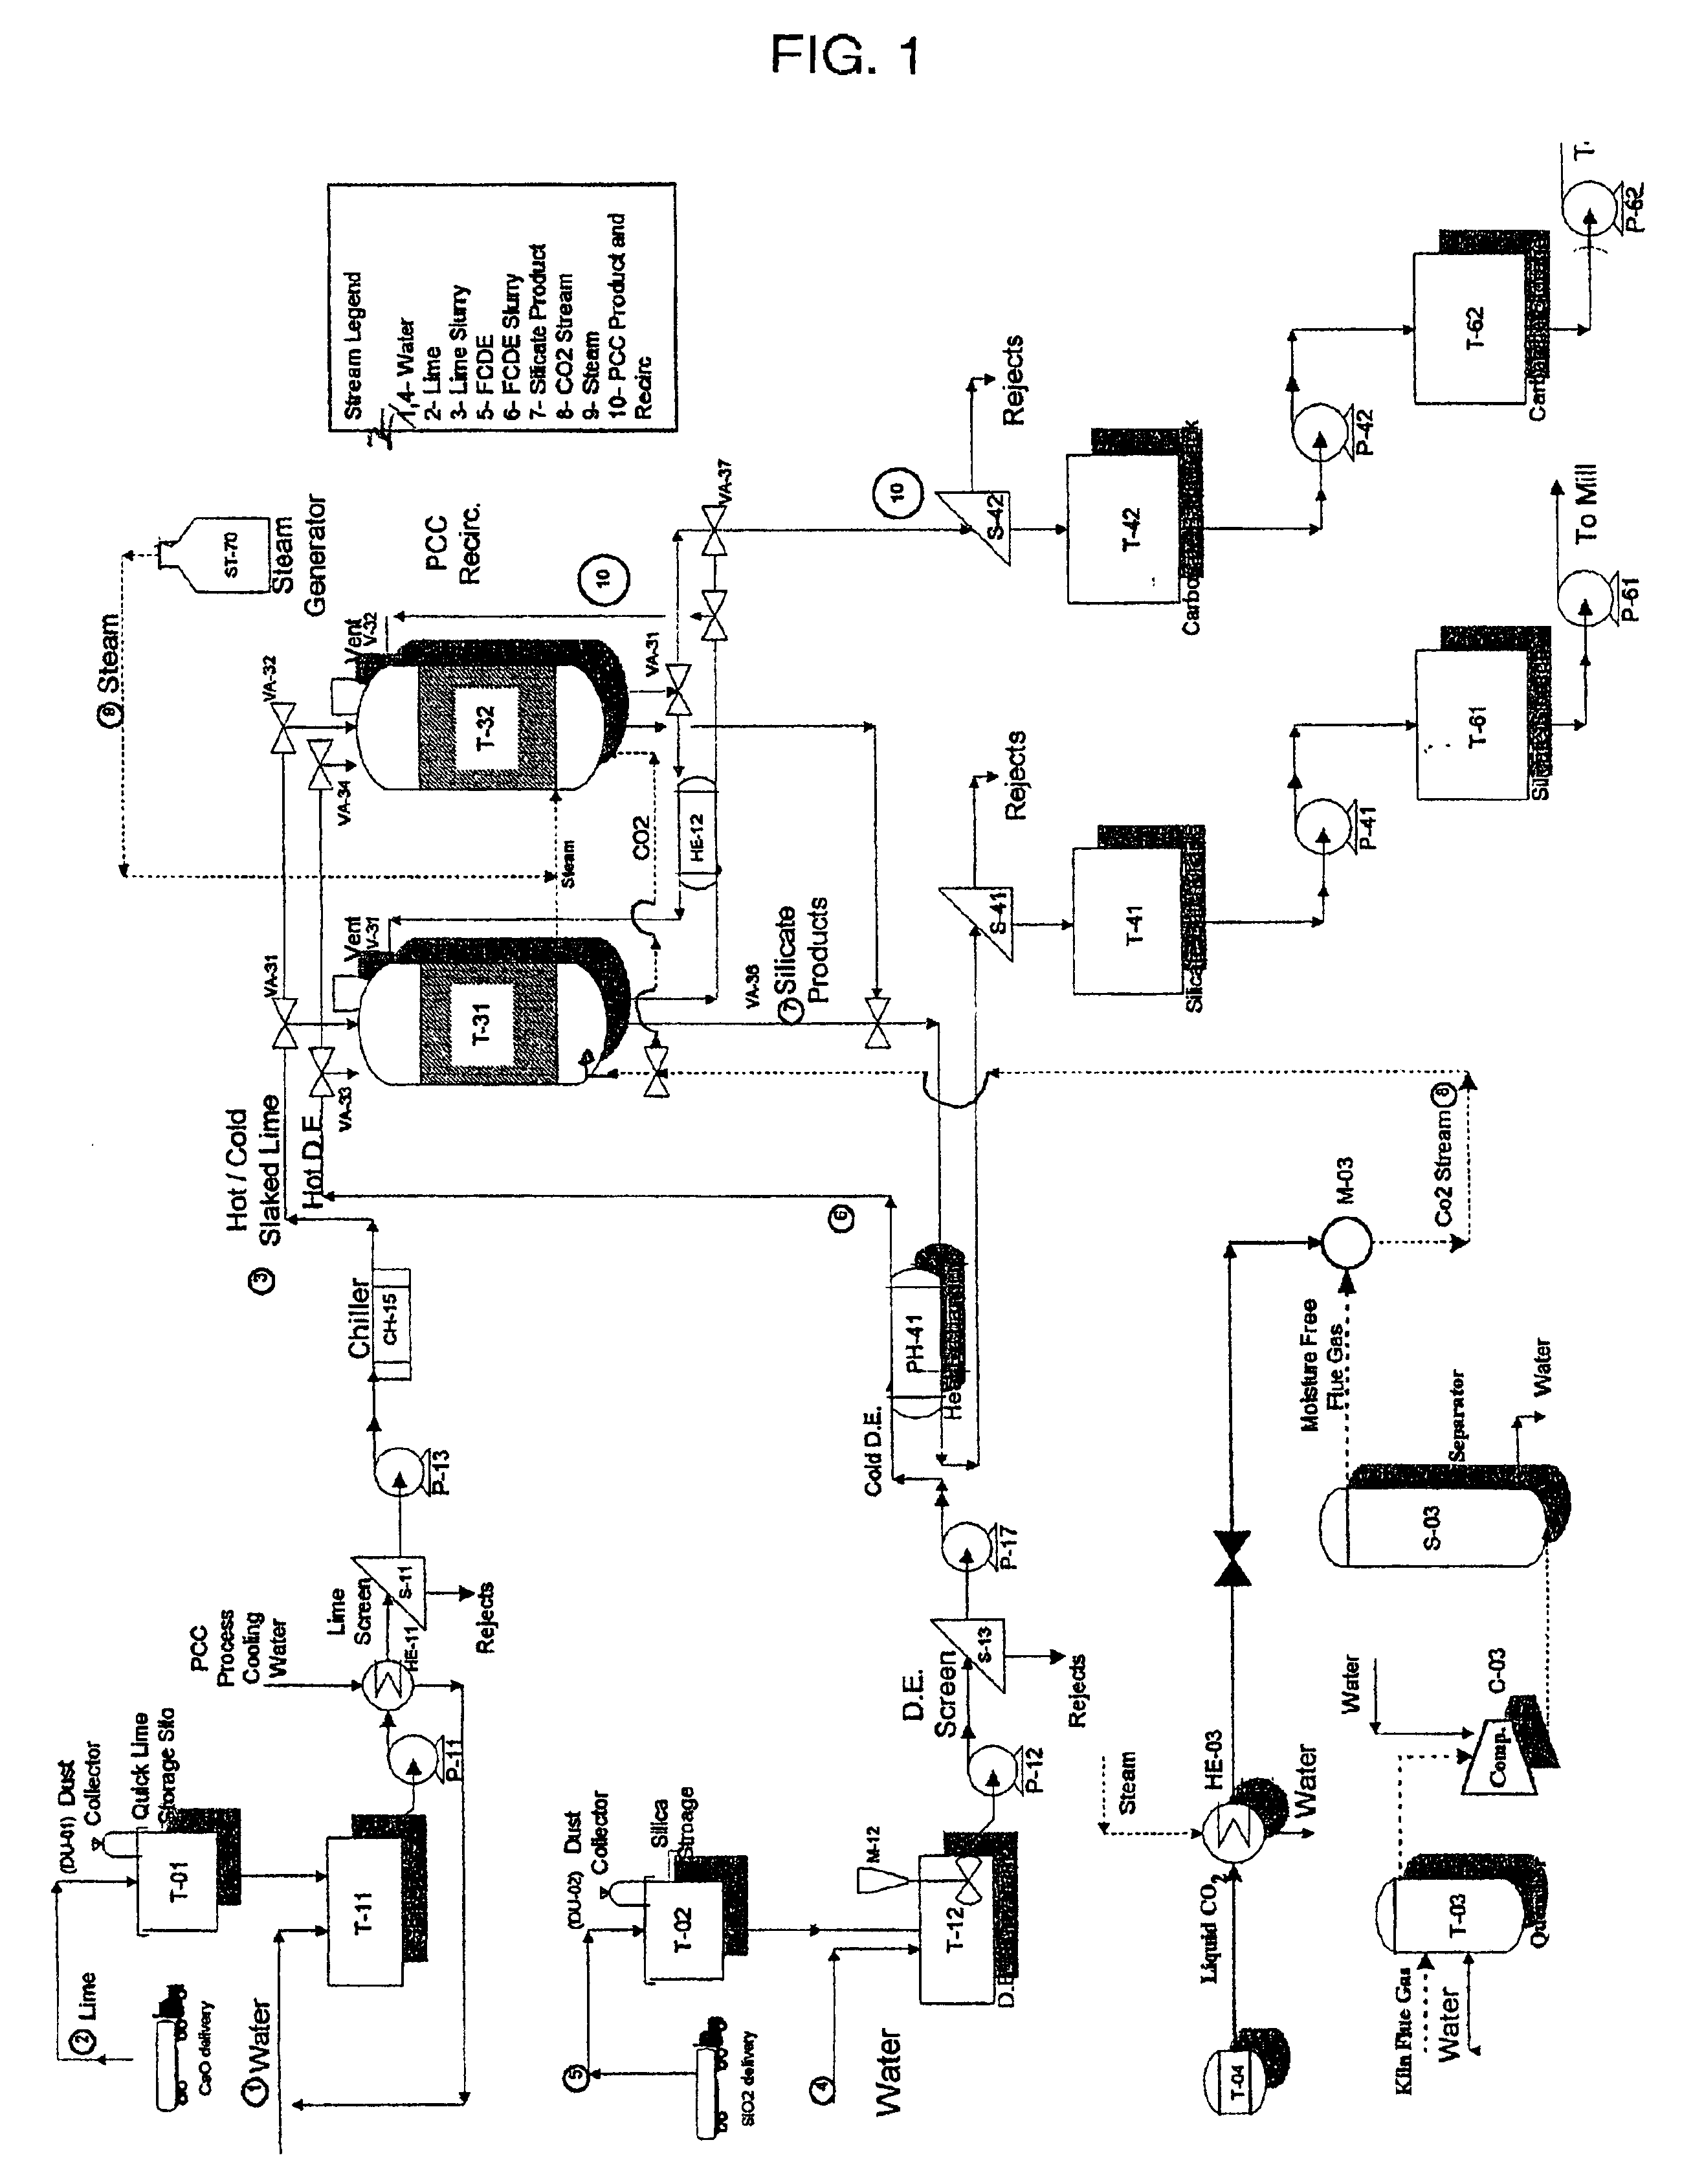 Method and apparatus for production of precipitated calcium carbonate and silicate compounds in common process equipment